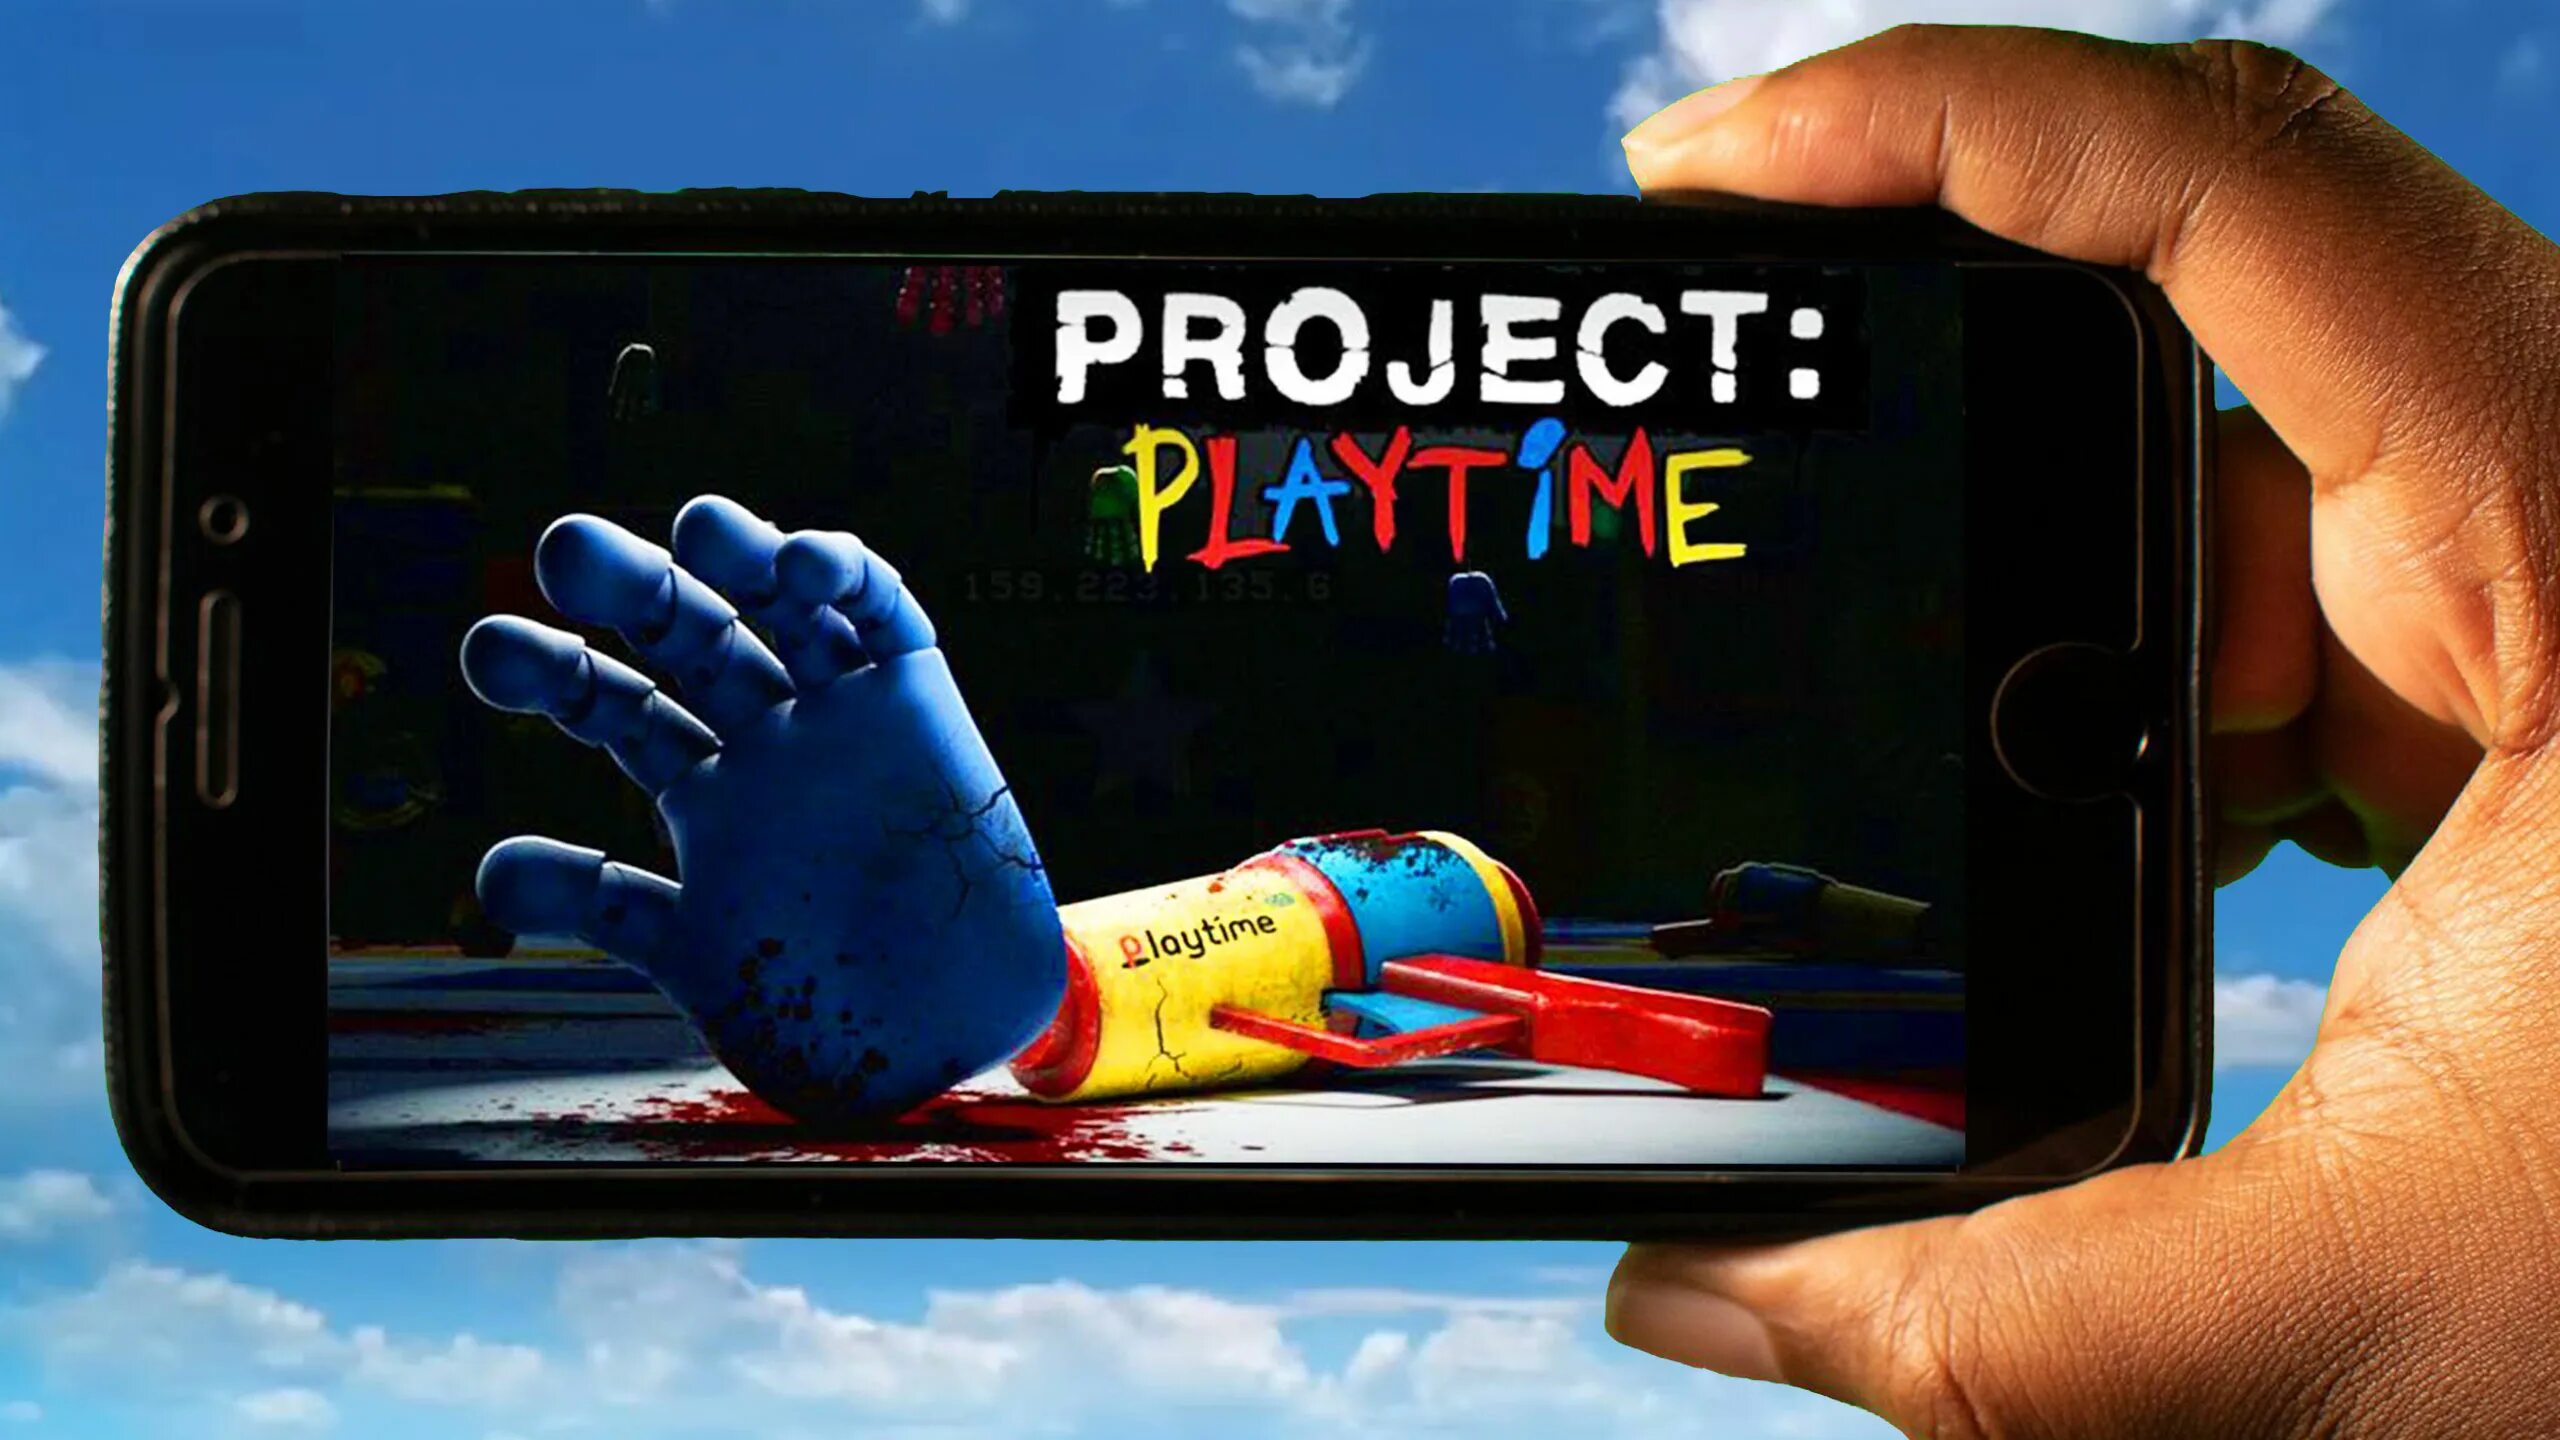 Project playtime game. Project Playtime. Проджек плэитаим. Project Playtime тикеты. Проект Play time mobile.